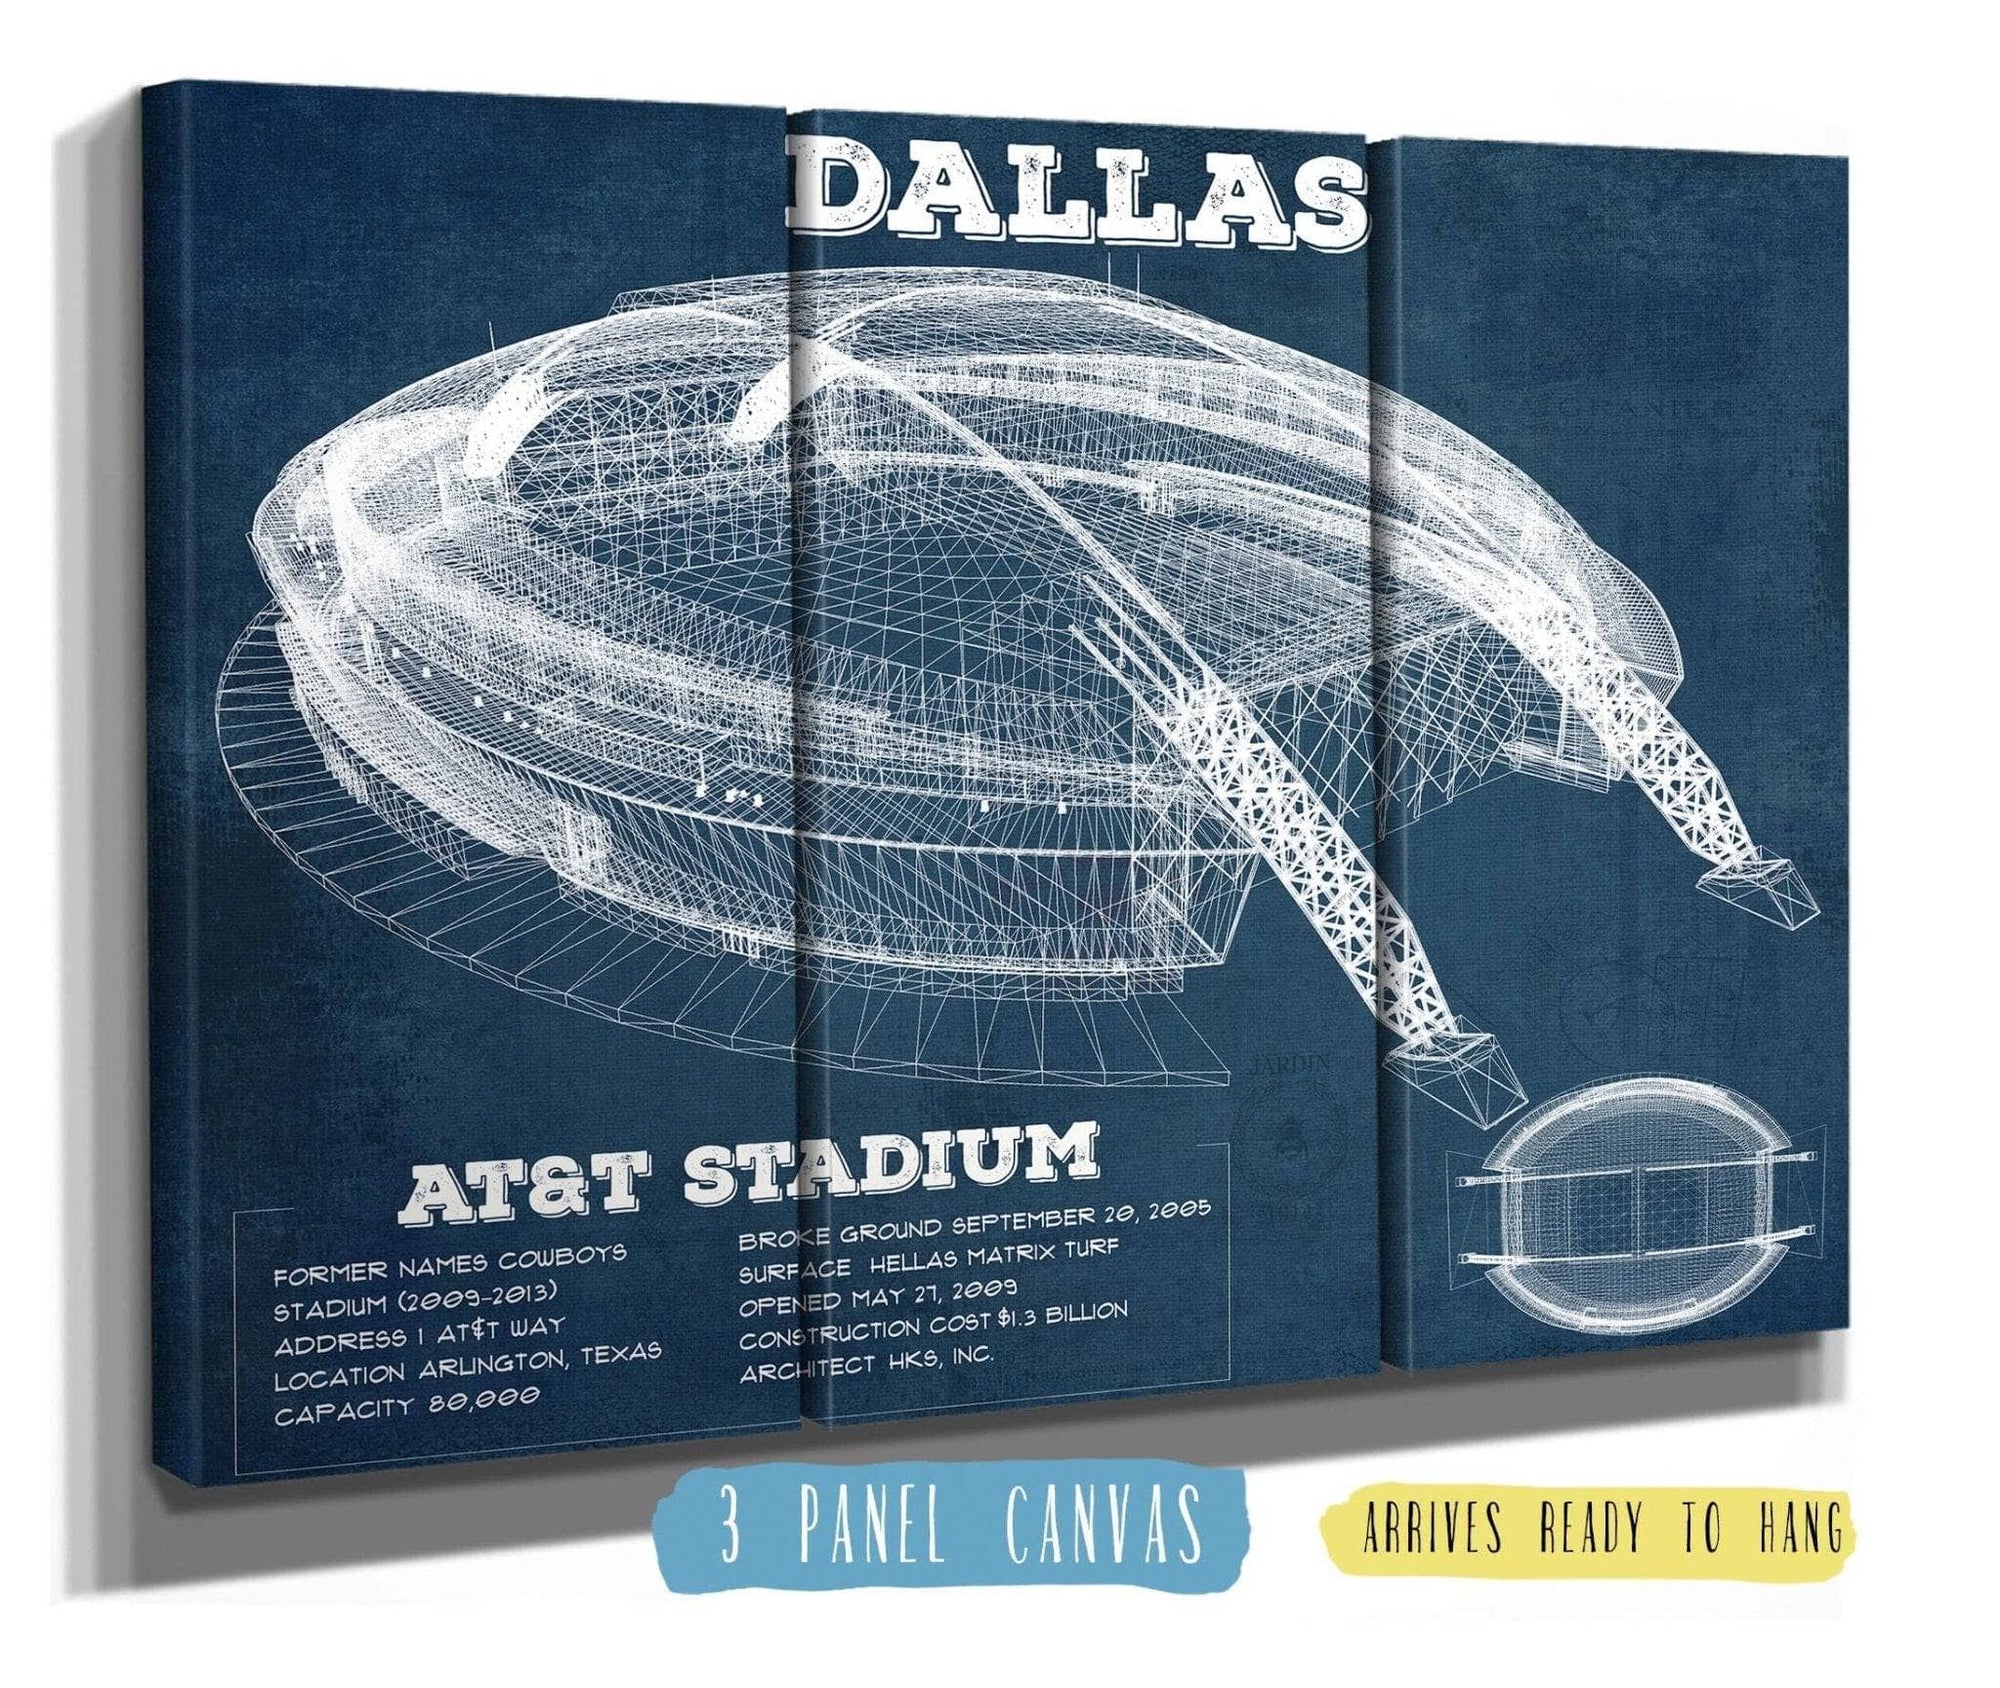 Cutler West Pro Football Collection 48" x 32" / 3 Panel Canvas Wrap Dallas Cowboys - AT&T Stadium - Vintage Football Print 667011899-TOP